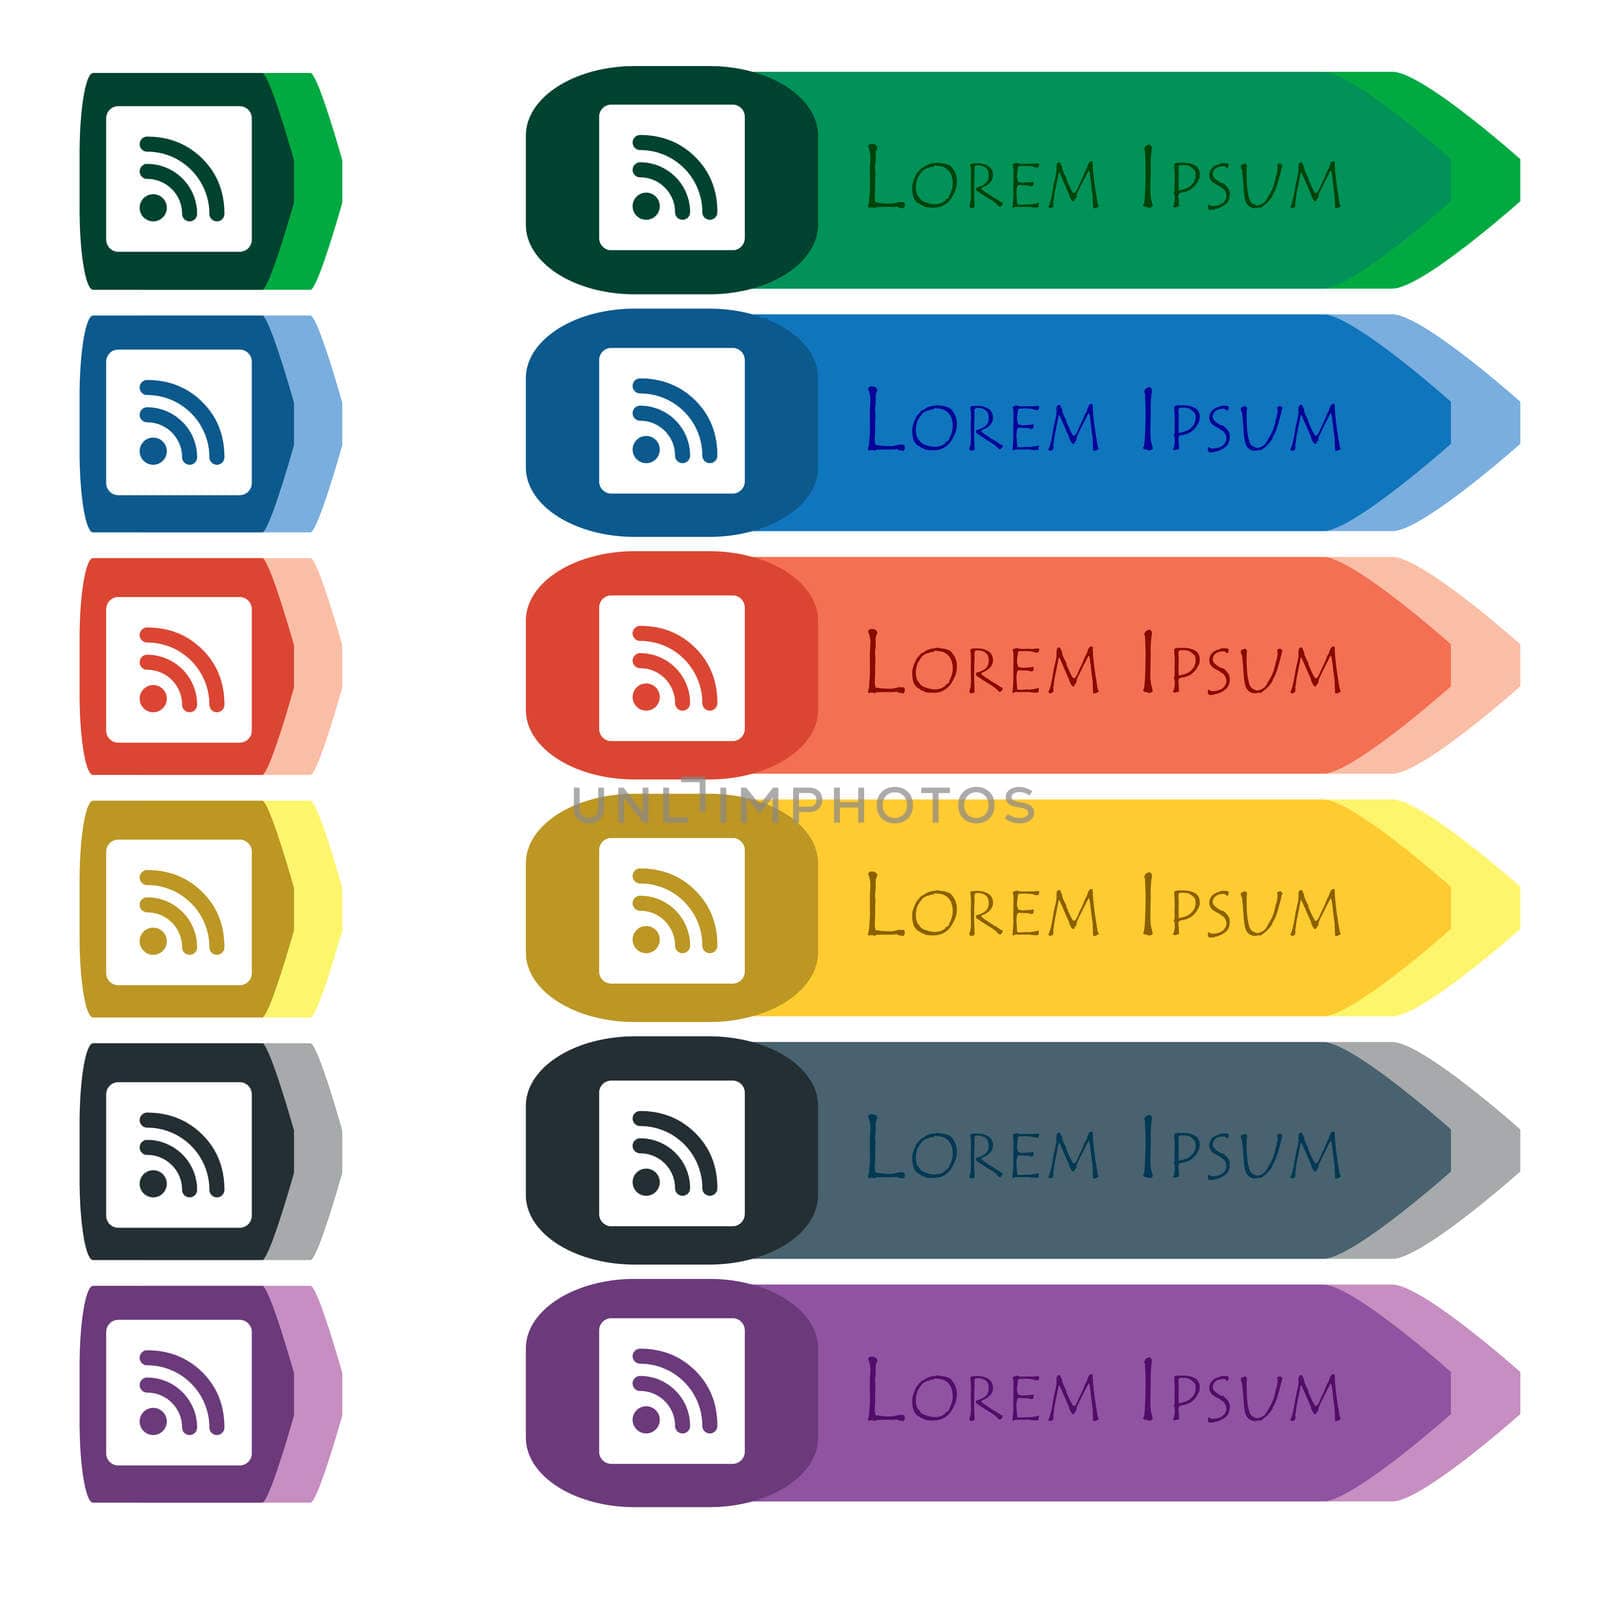 RSS feed icon sign. Set of colorful, bright long buttons with additional small modules. Flat design. 